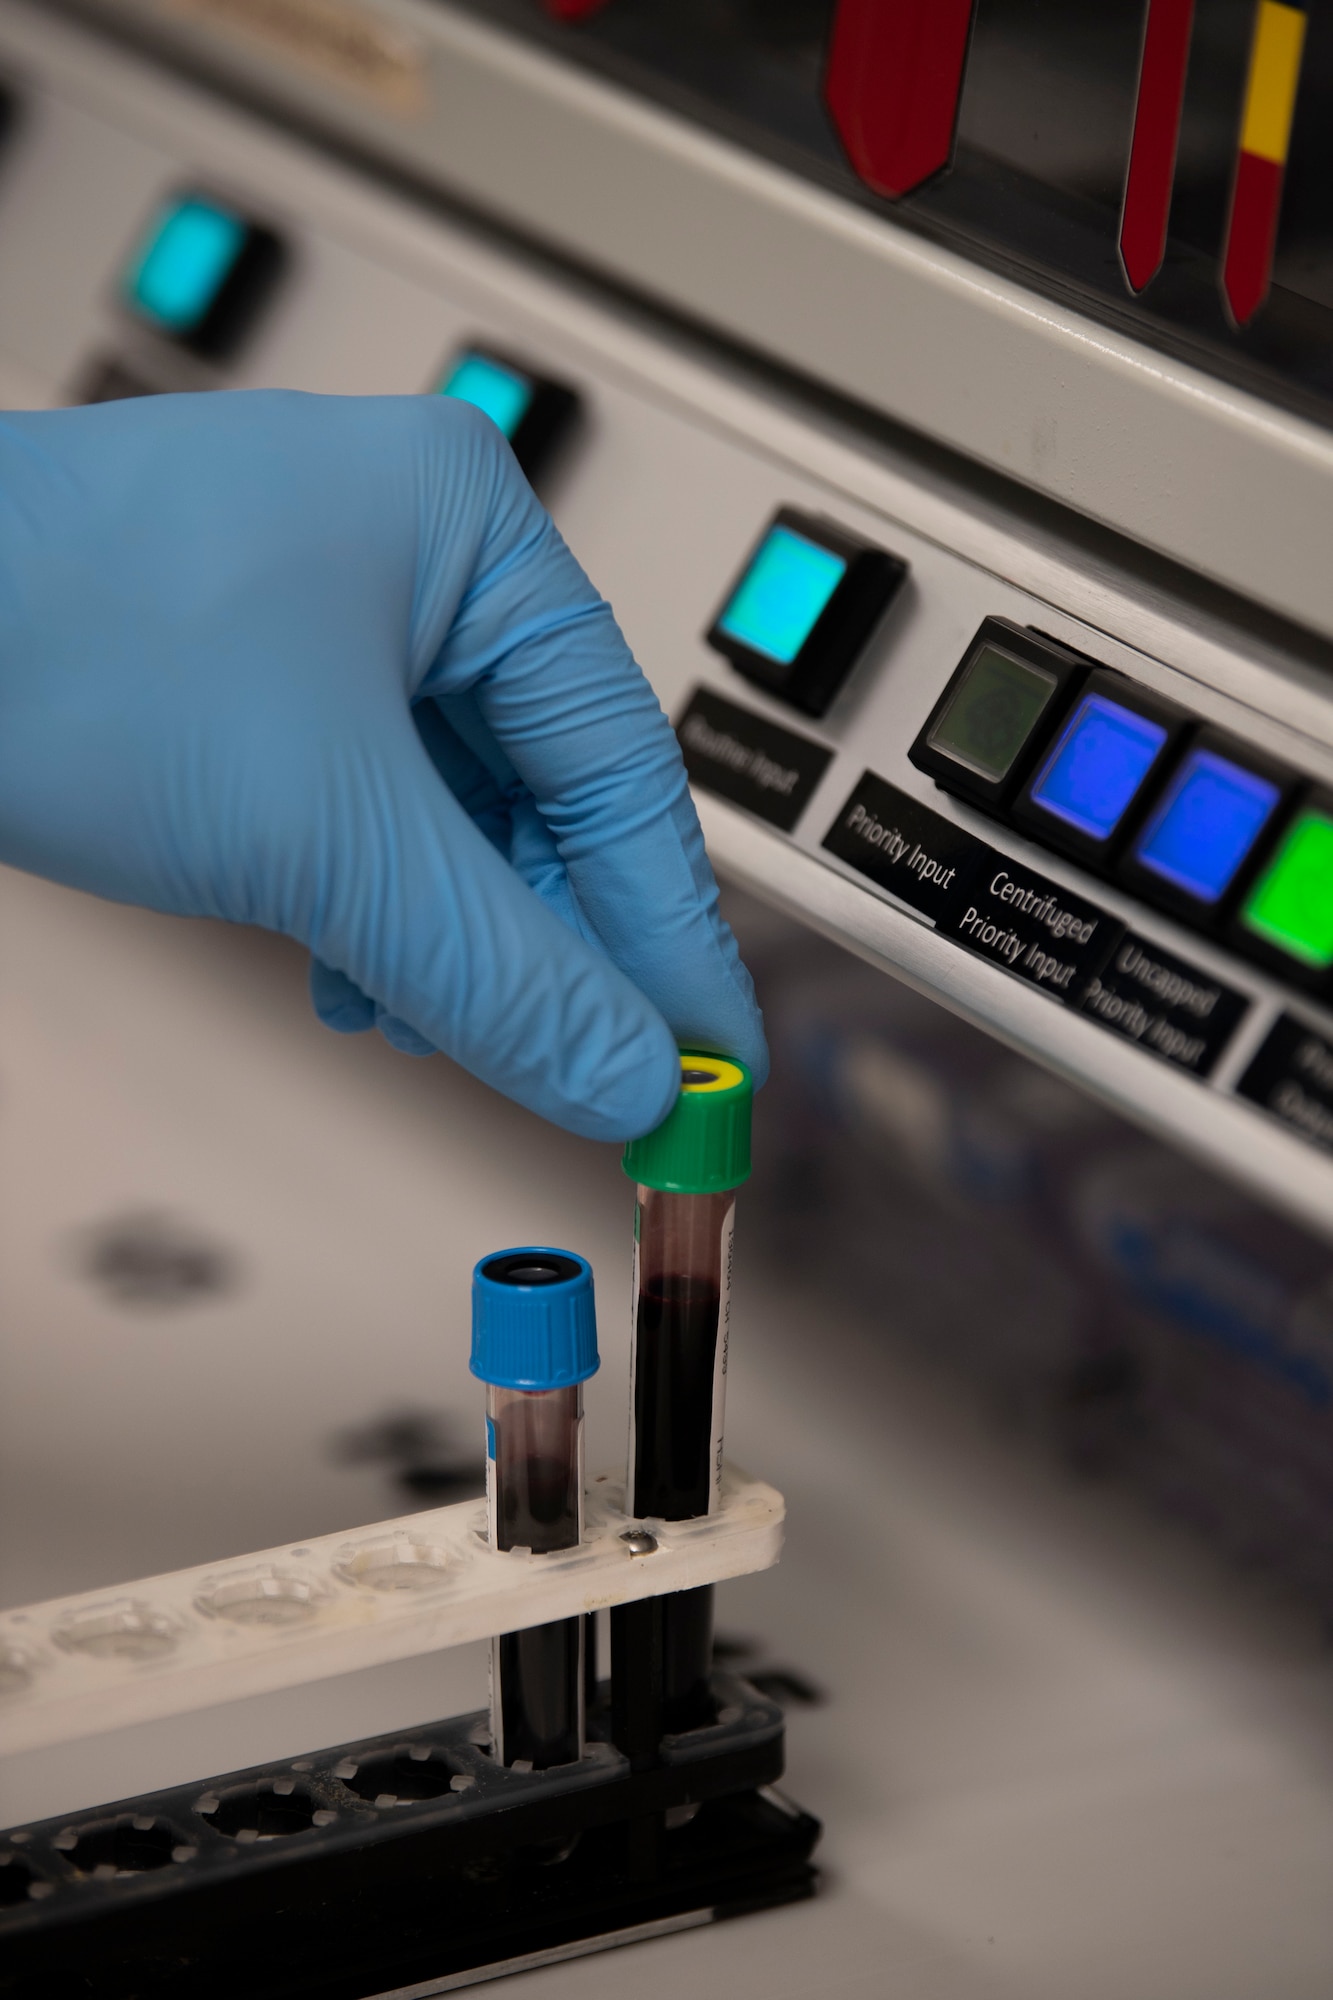 U.S. Air Force Staff Sgt. Eric Crandell, 60th Medical and Diagnostics Therapeutic Squadron Laboratory technician, processes a blood sample April 4, 2019, at Travis Air Force Base, California. David Grant USAF Medical Center operates the Air Force’s larges clinical laboratory, supporting 465 health care providers and 325,000 patients per year. Technicians perform 1.2 million tests annually in chemistry, special chemistry, hematology, coagulation, immunology, microbiology, point-of-care testing, histology, cytology and transfusion services. (U.S. Air Force photo by Airman 1st Class Jonathon Carnell)